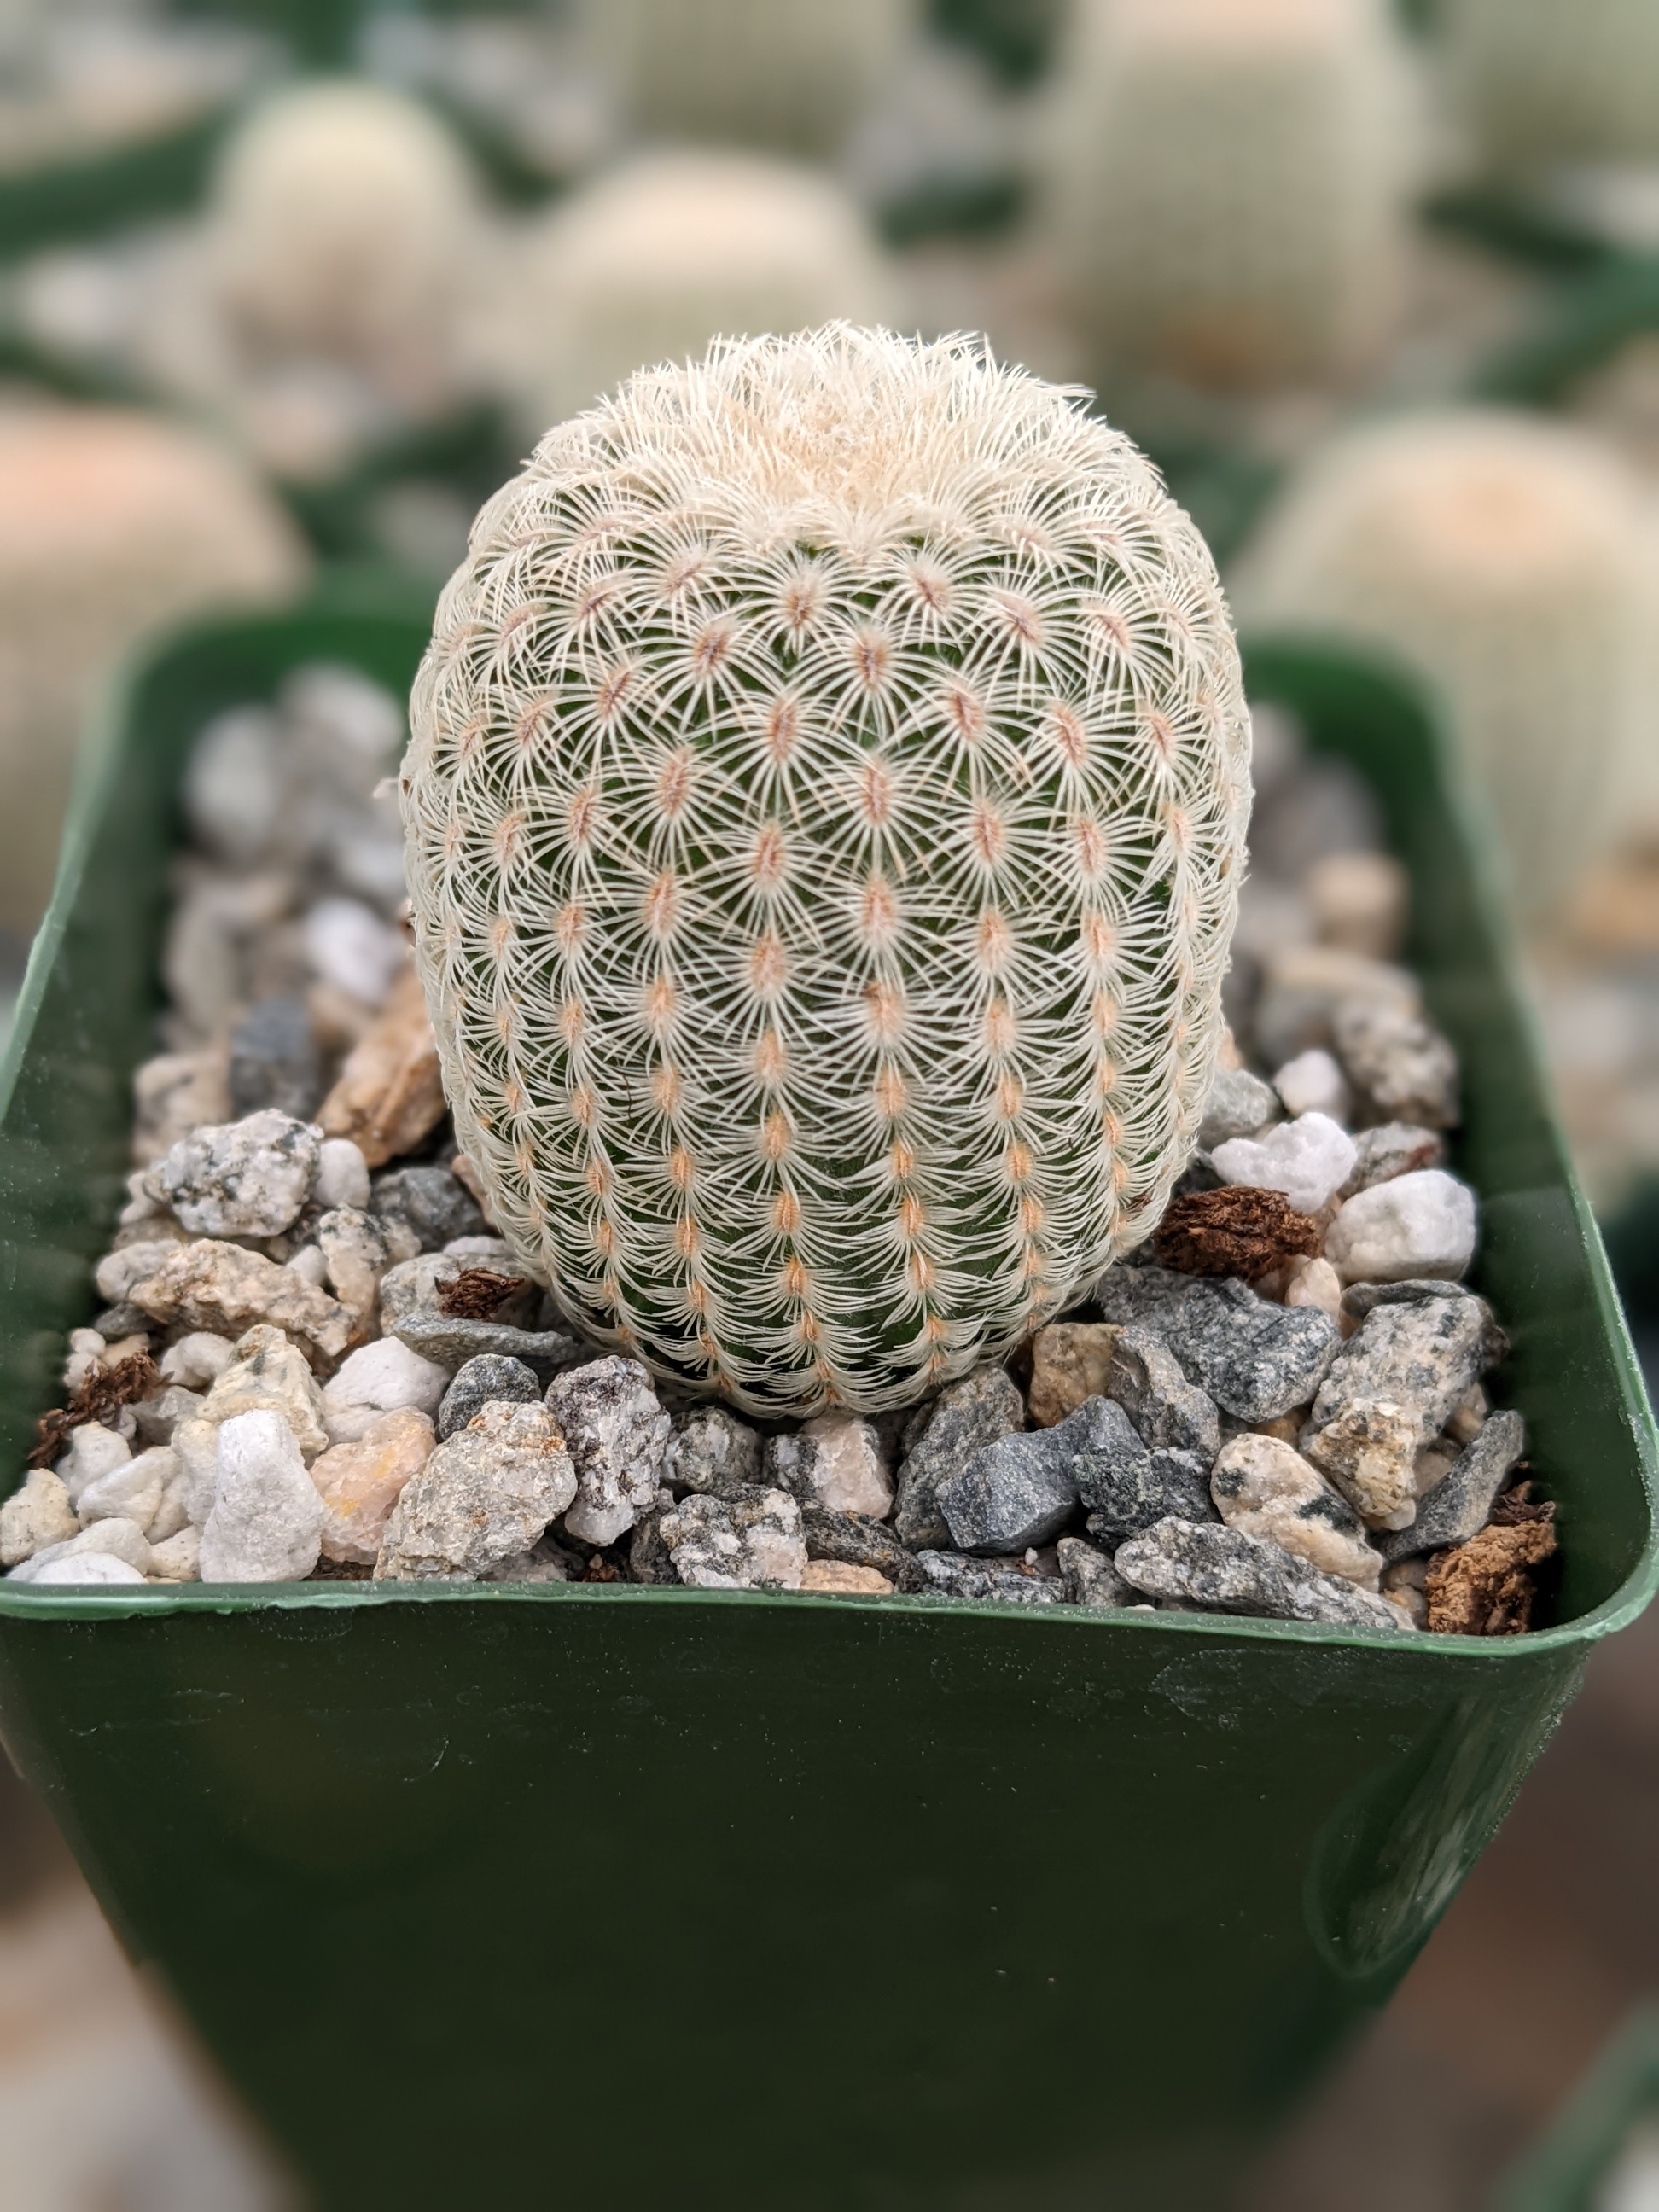 Echinocereus Cactus: Growth and Care Guide